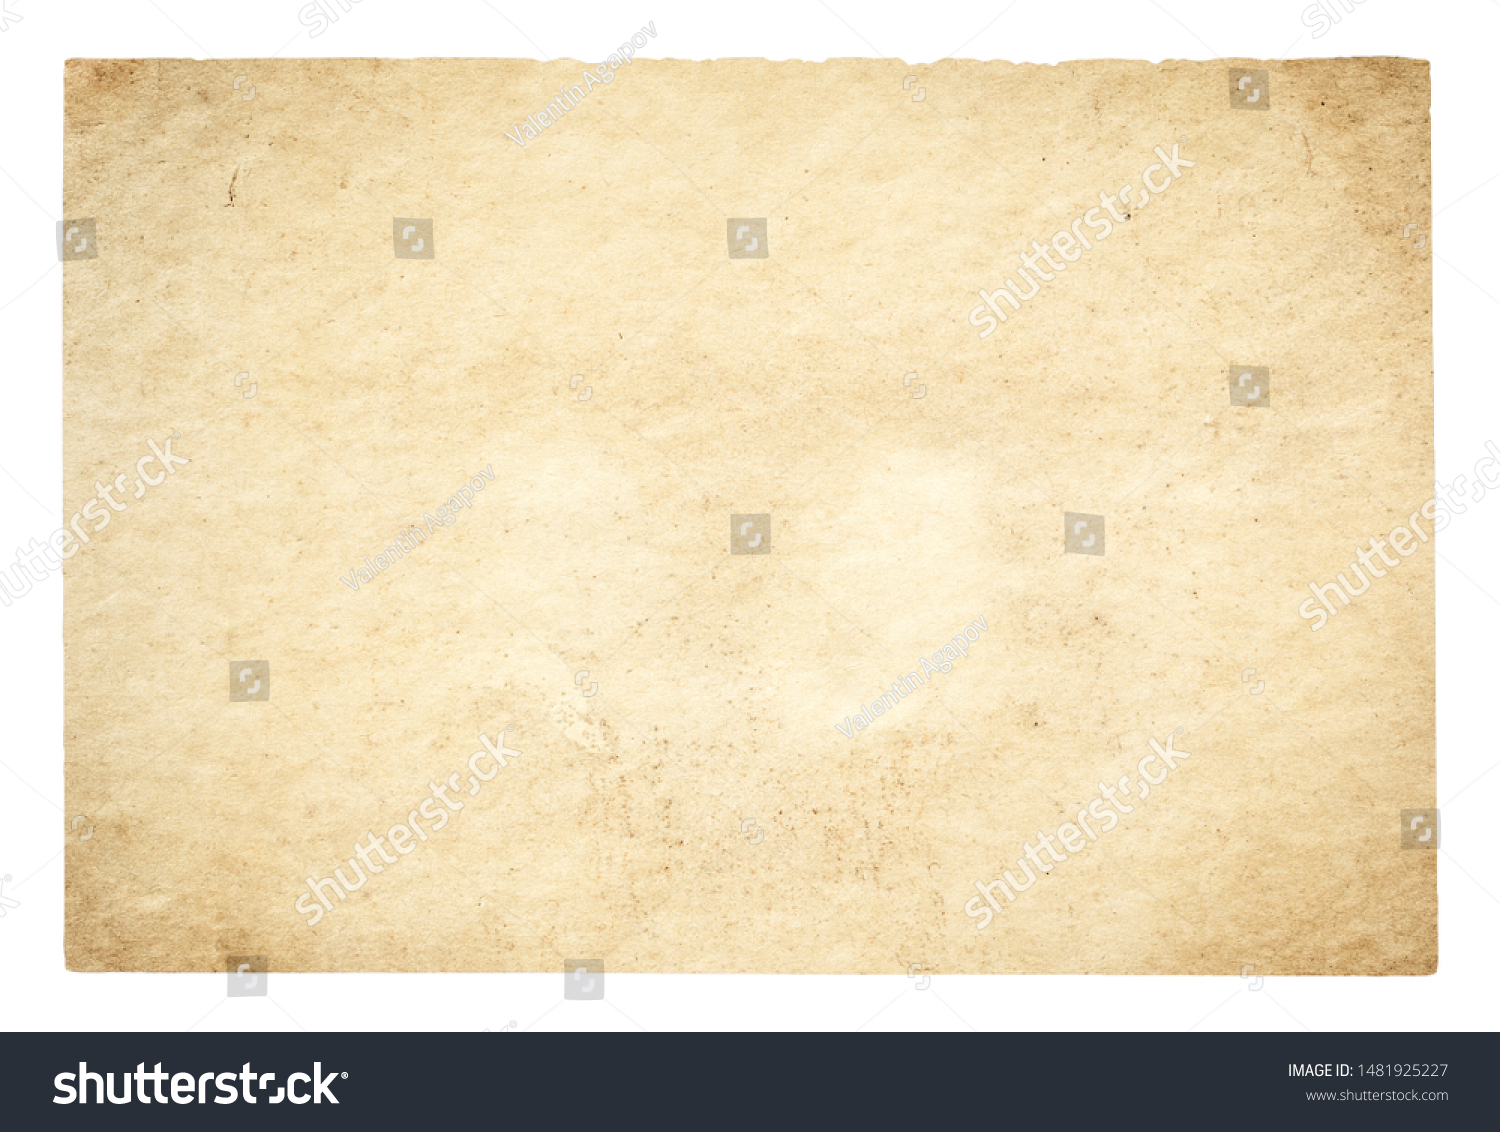 old paper isolated on white background with clipping path #1481925227